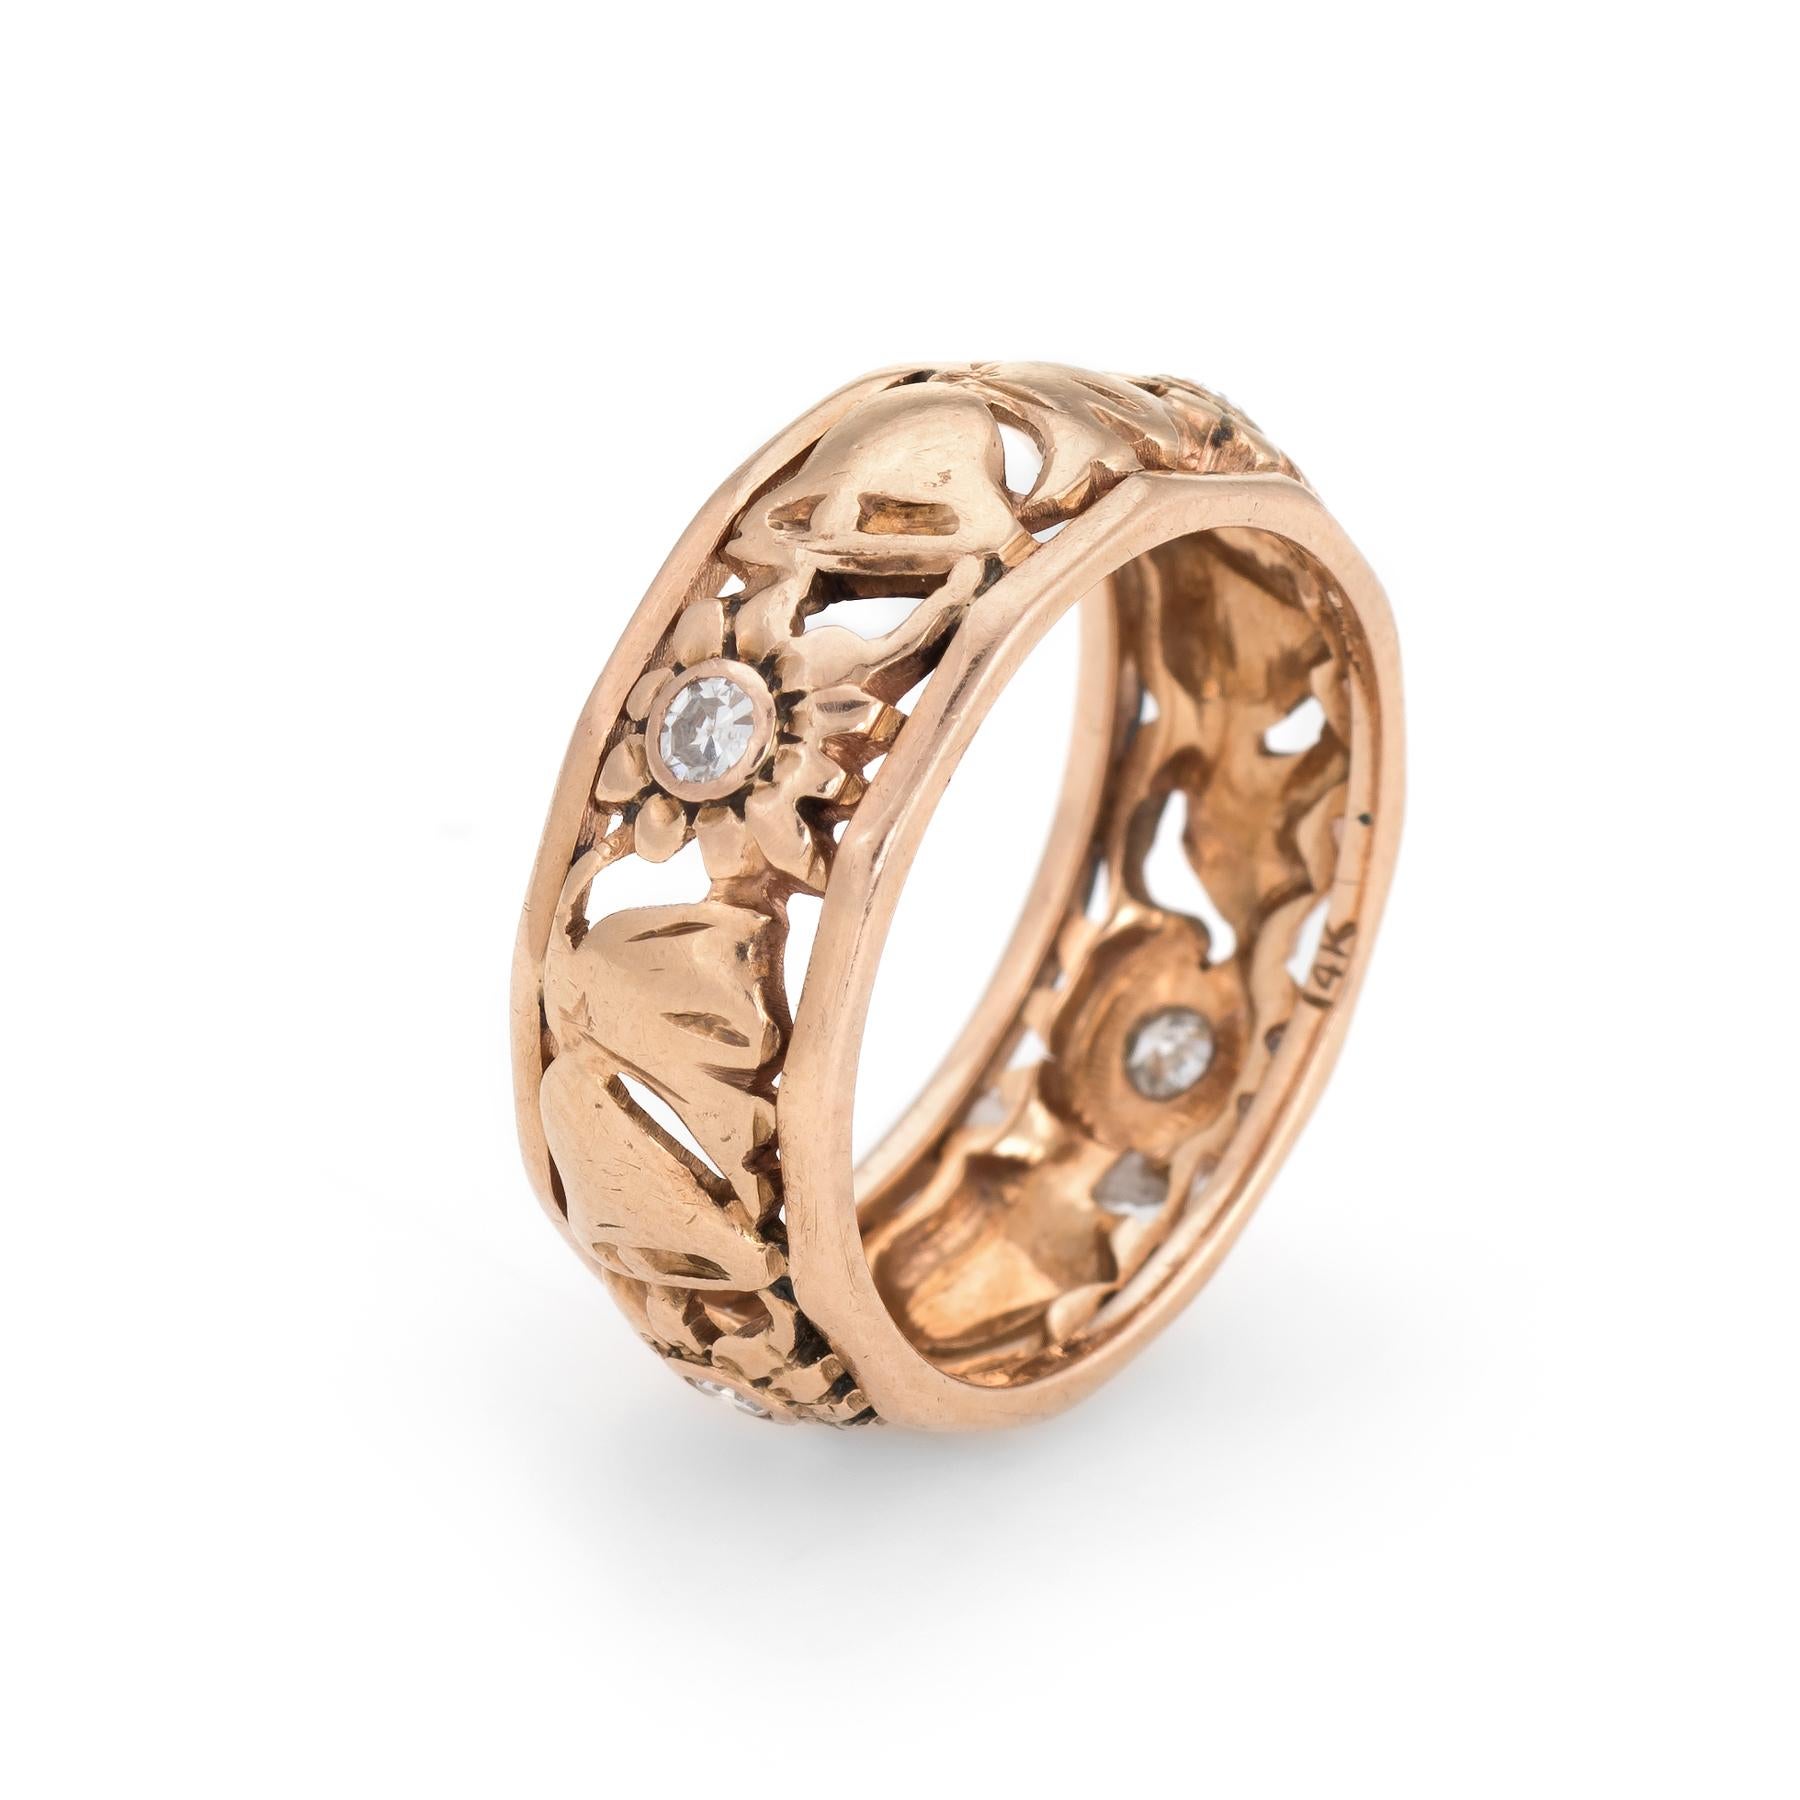 Elegant vintage wedding band (circa 1950s to 1960s), crafted in 14 karat rose gold. 

Four single cut diamonds are estimated at 0.04 carats each and total an estimated 0.16 carats (estimated at H-I color and SI2-I1 clarity).

Charming flower and